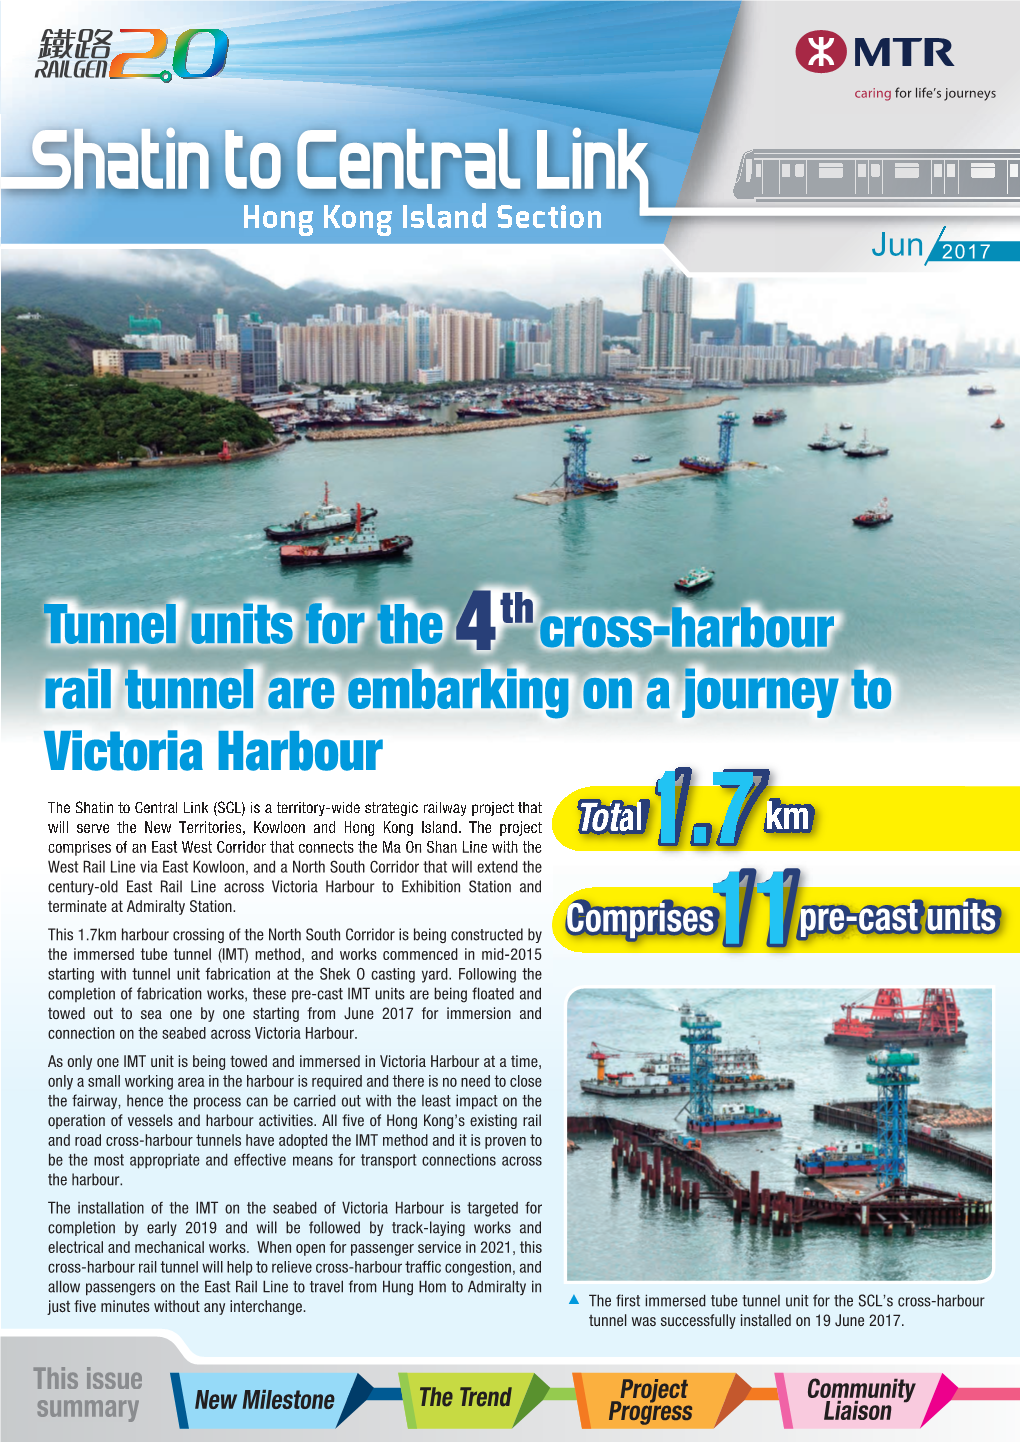 Tunnel Units for the 4Th Cross-Harbour Rail Tunnel Are Embarking on a Journey to Victoria Harbour